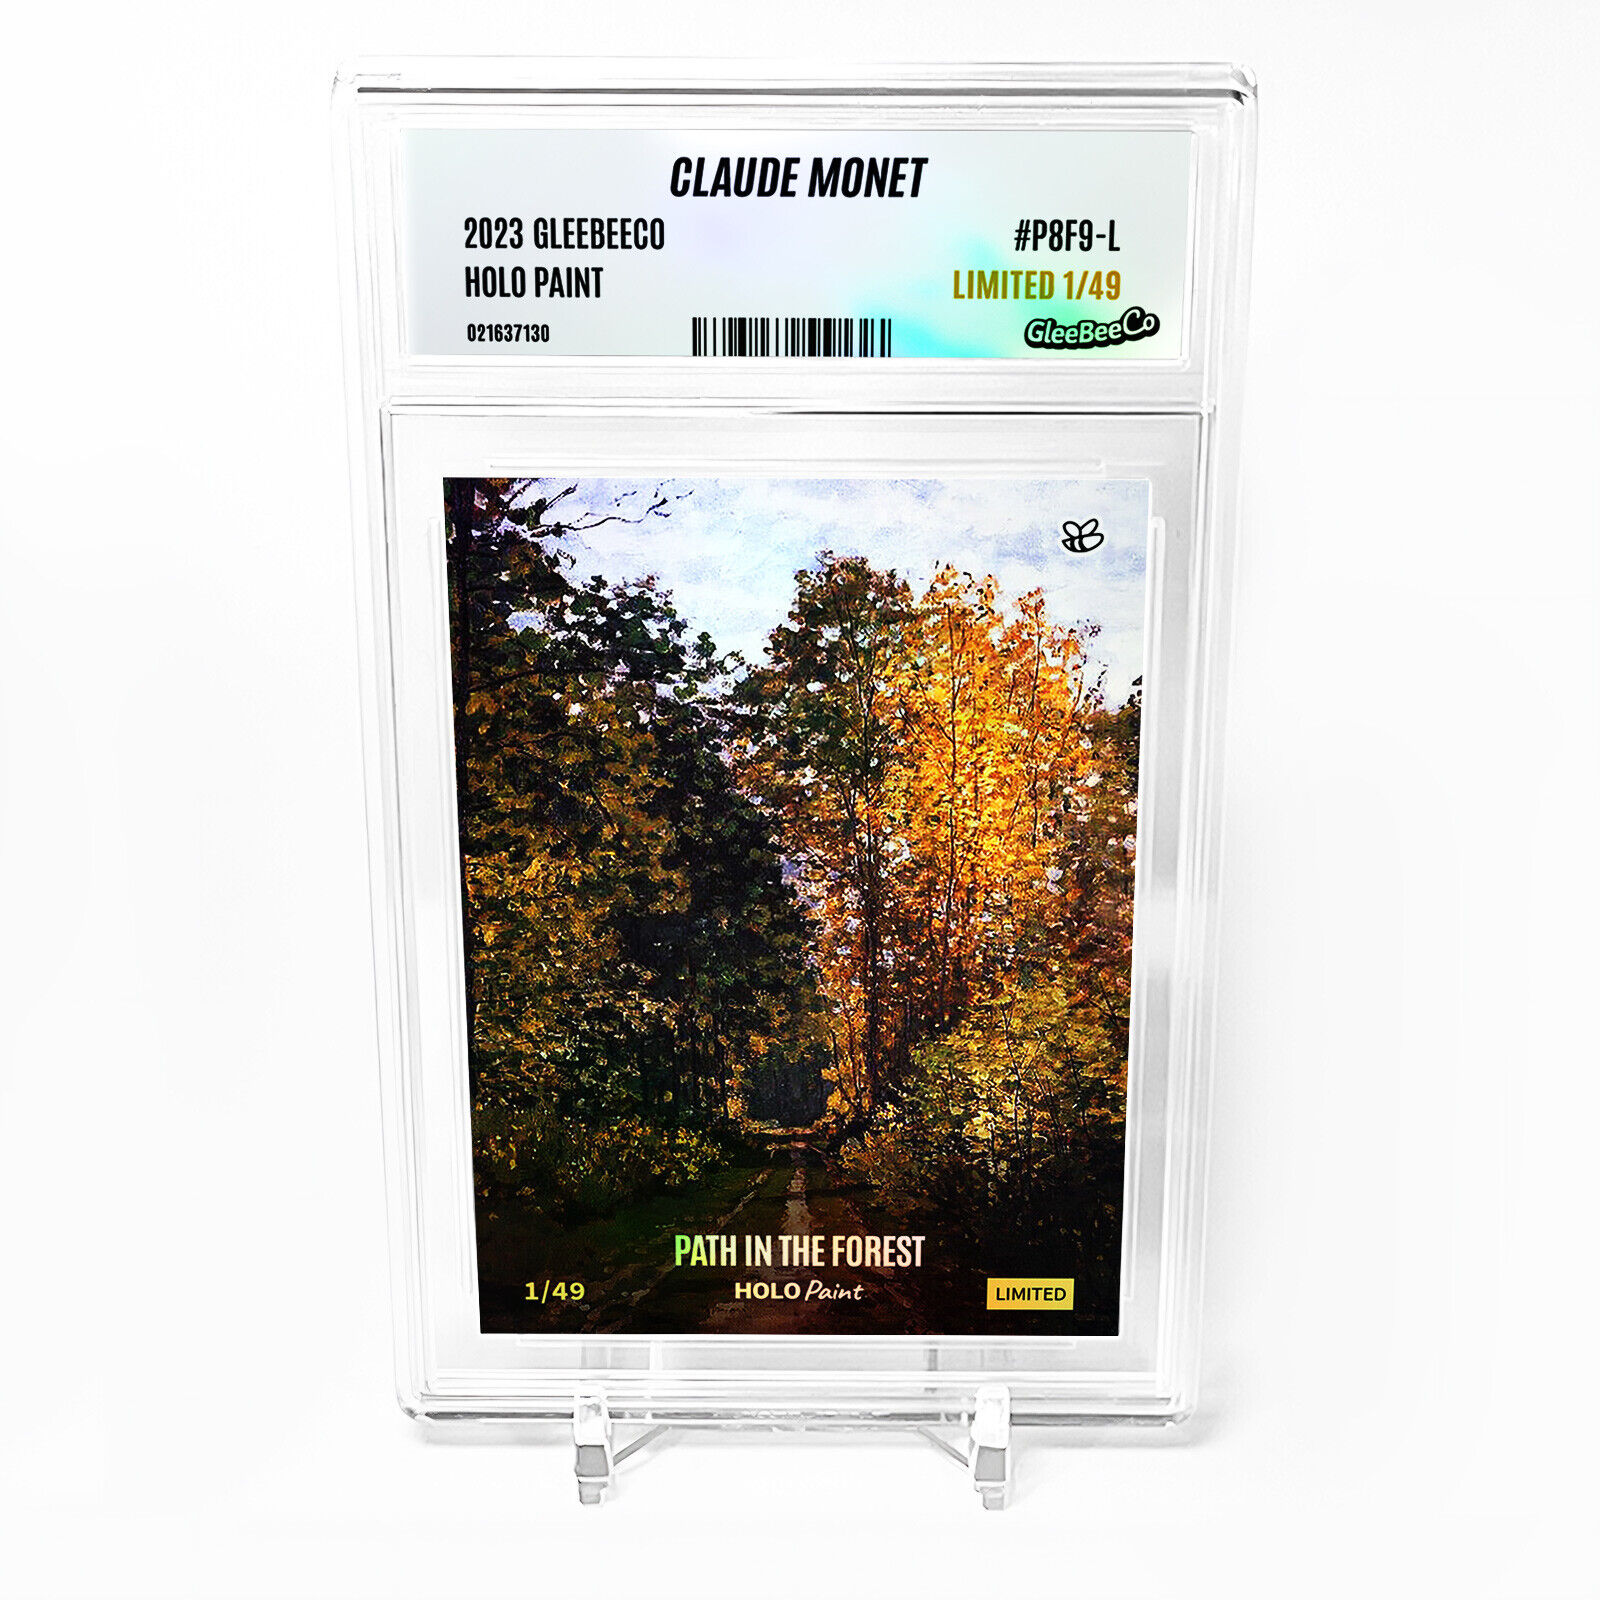 PATH IN THE FOREST Card 2023 GleeBeeCo Holo Paint Claude Monet #P8F9-L /49